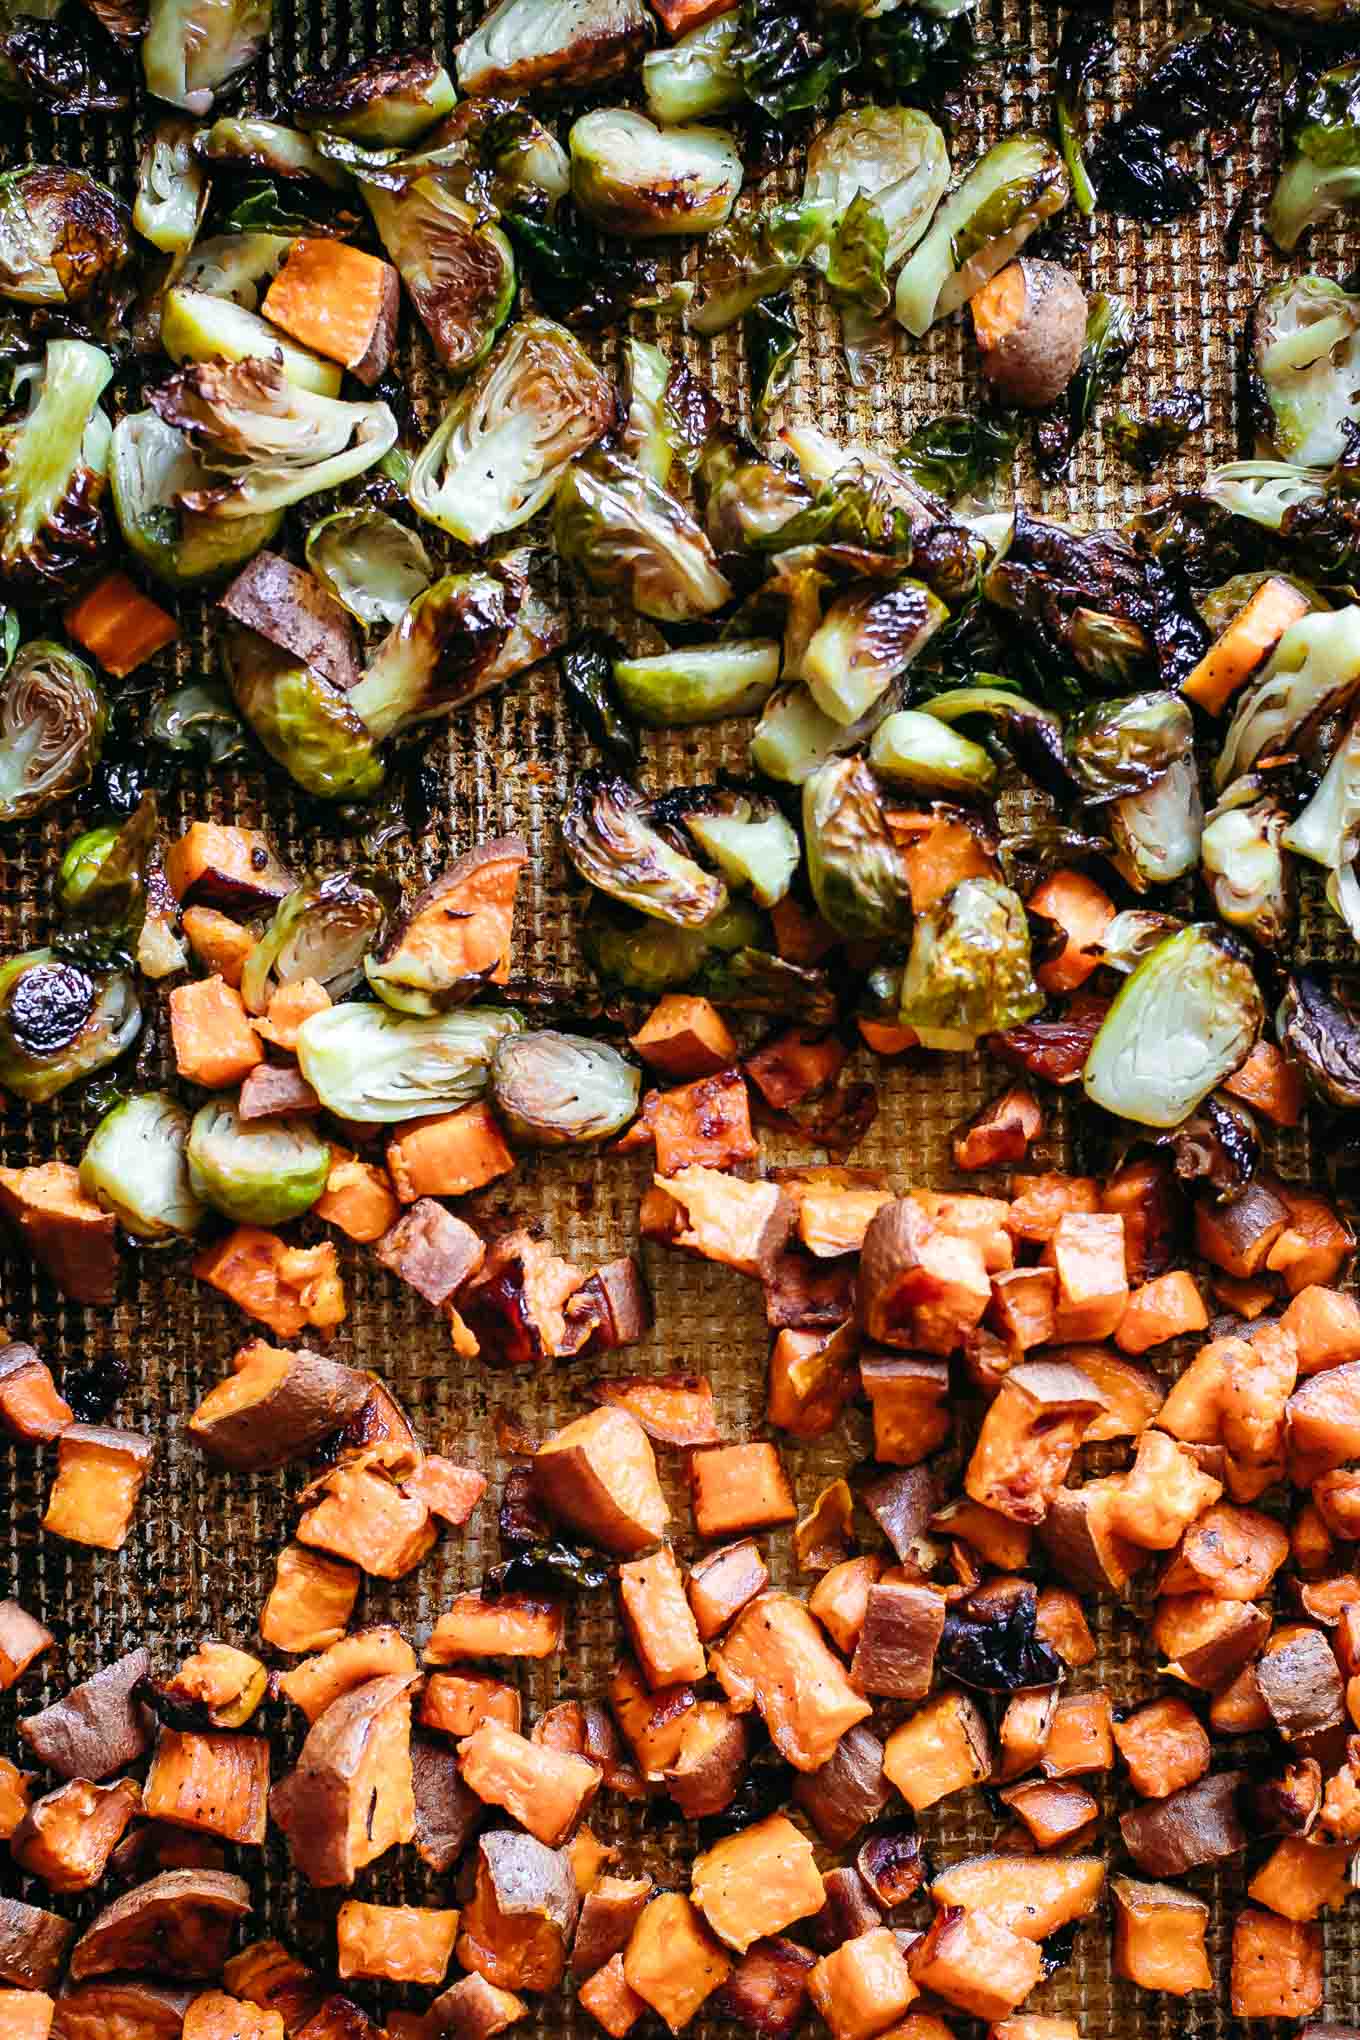 Roasted Brussels Sprouts and Sweet Potatoes | Easy, Tasty, 5 Ingredients!